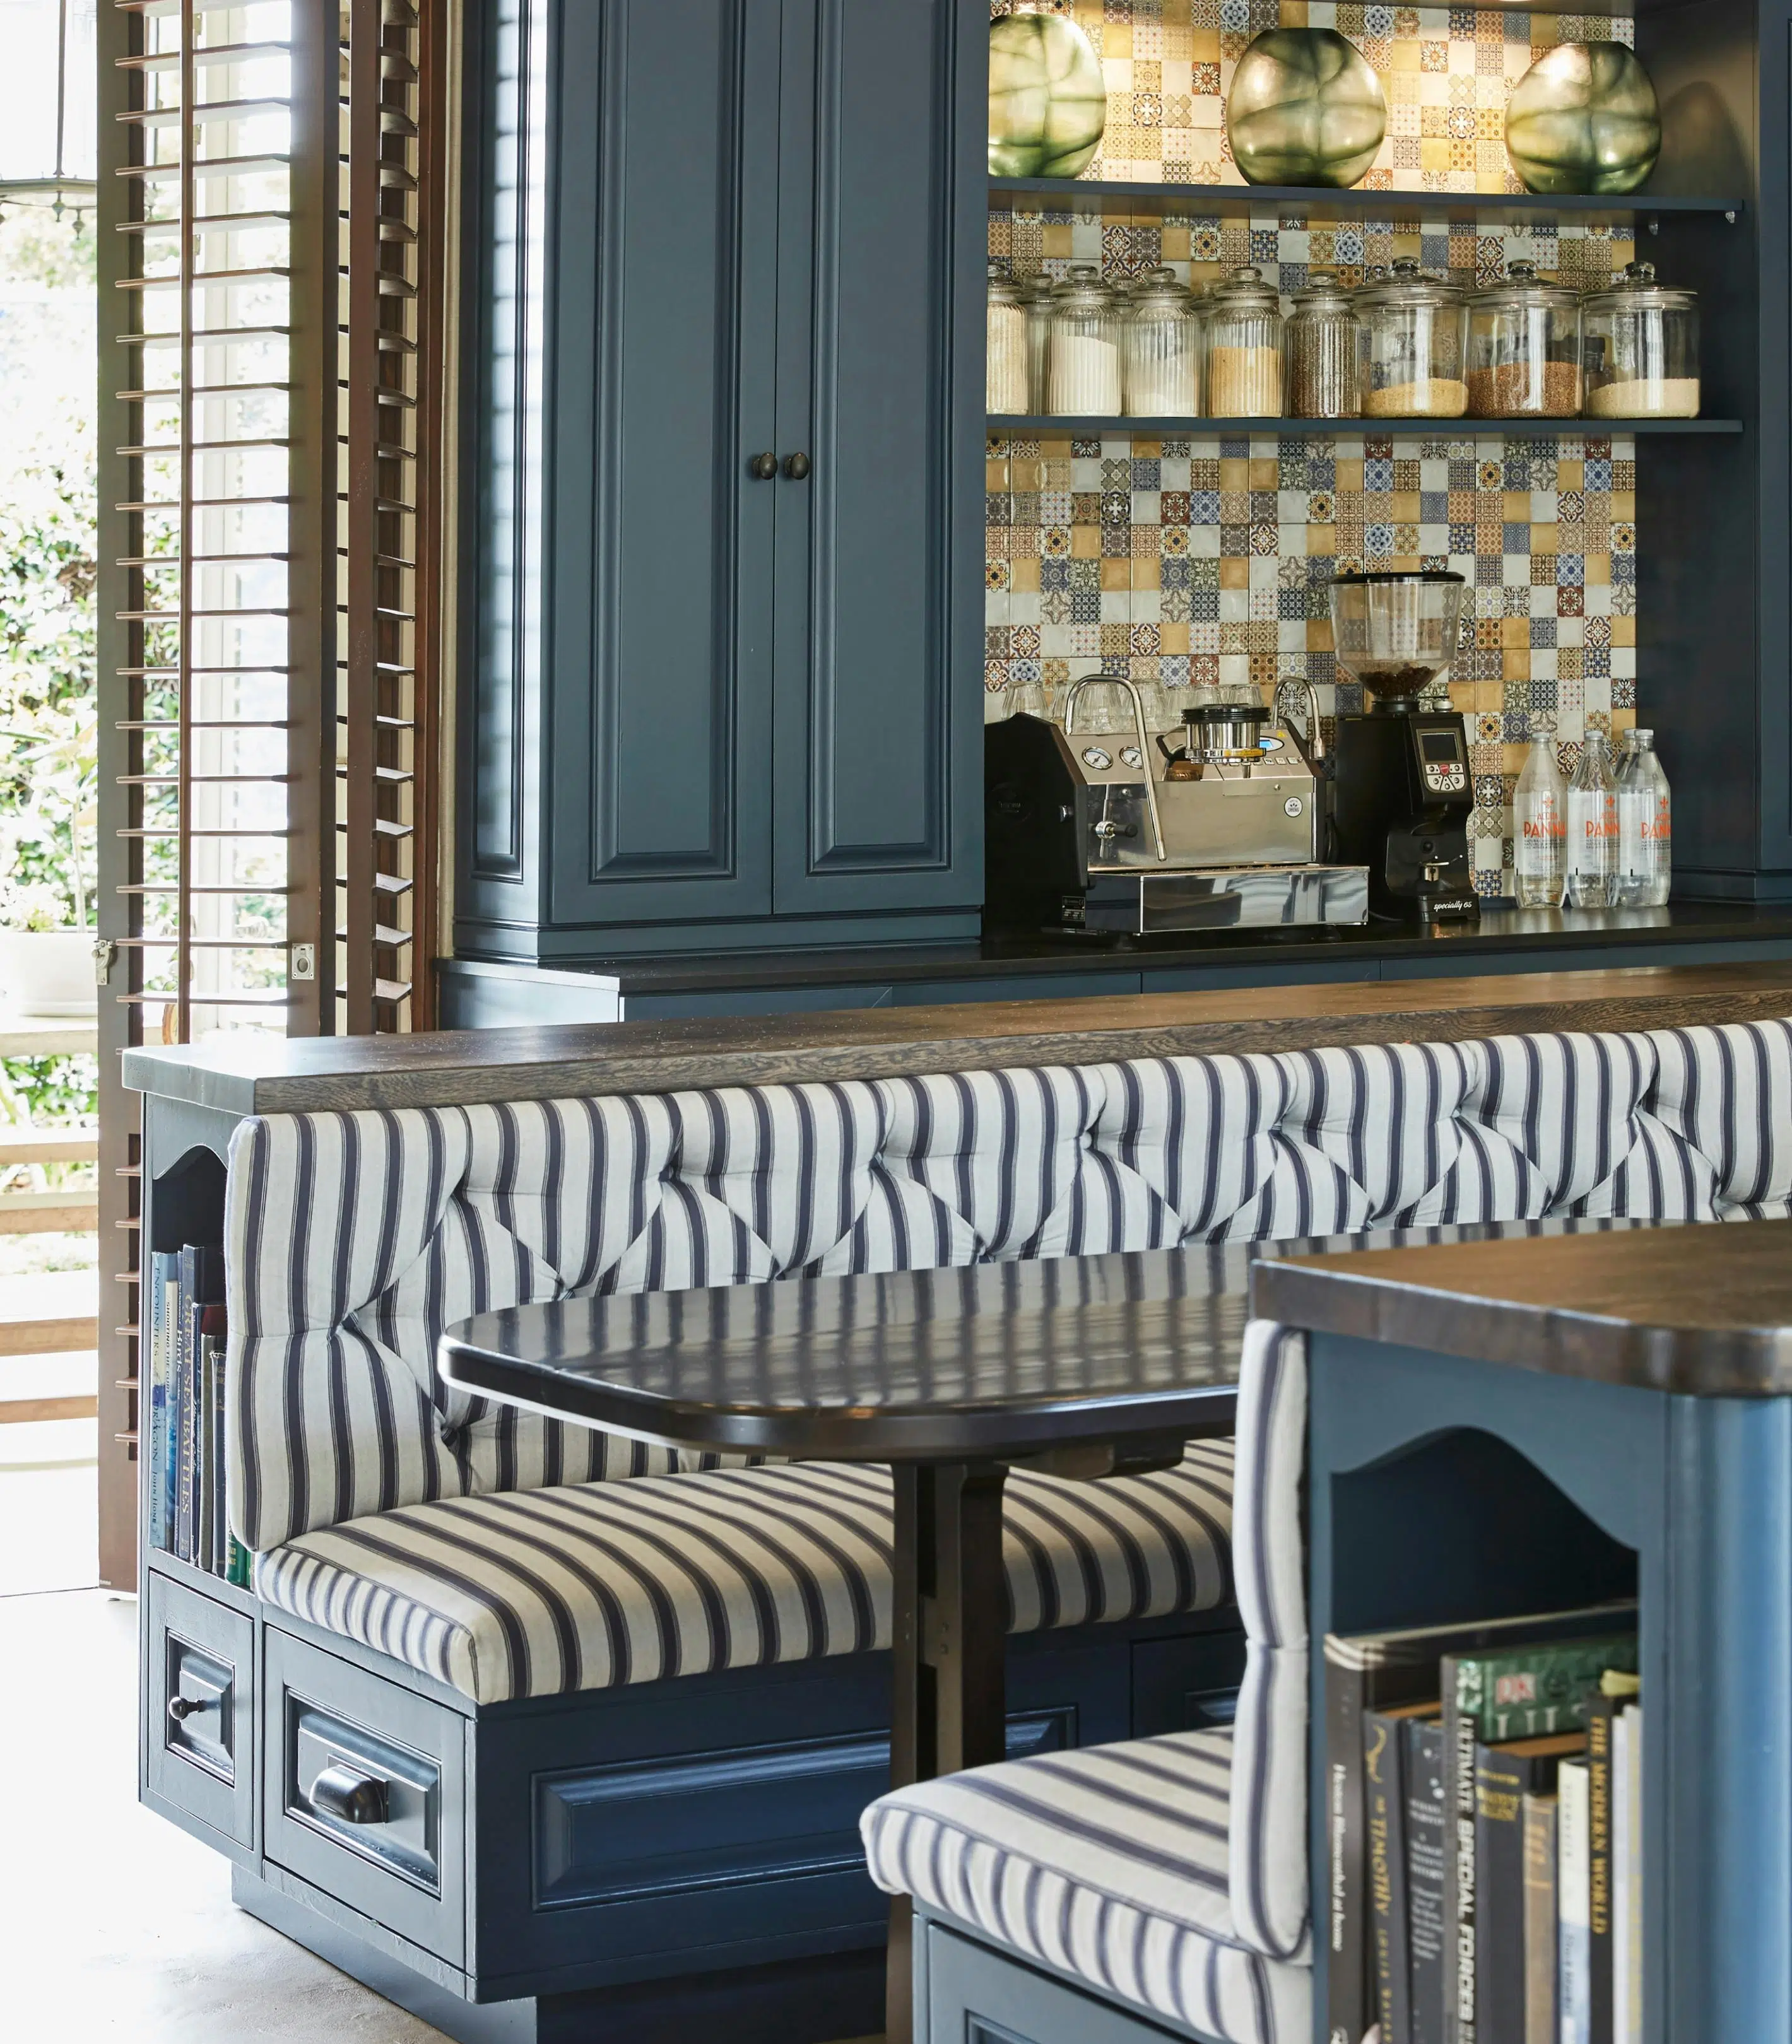 A breakfast nook, in dark blue-painted wood with built-in bookshelves and drawers, can be seen in front of a tall kitchen cupboard in the same treatment. A tiled section of the wall separates an area for a coffee machine, bean grinder, and shelves holding dry goods.